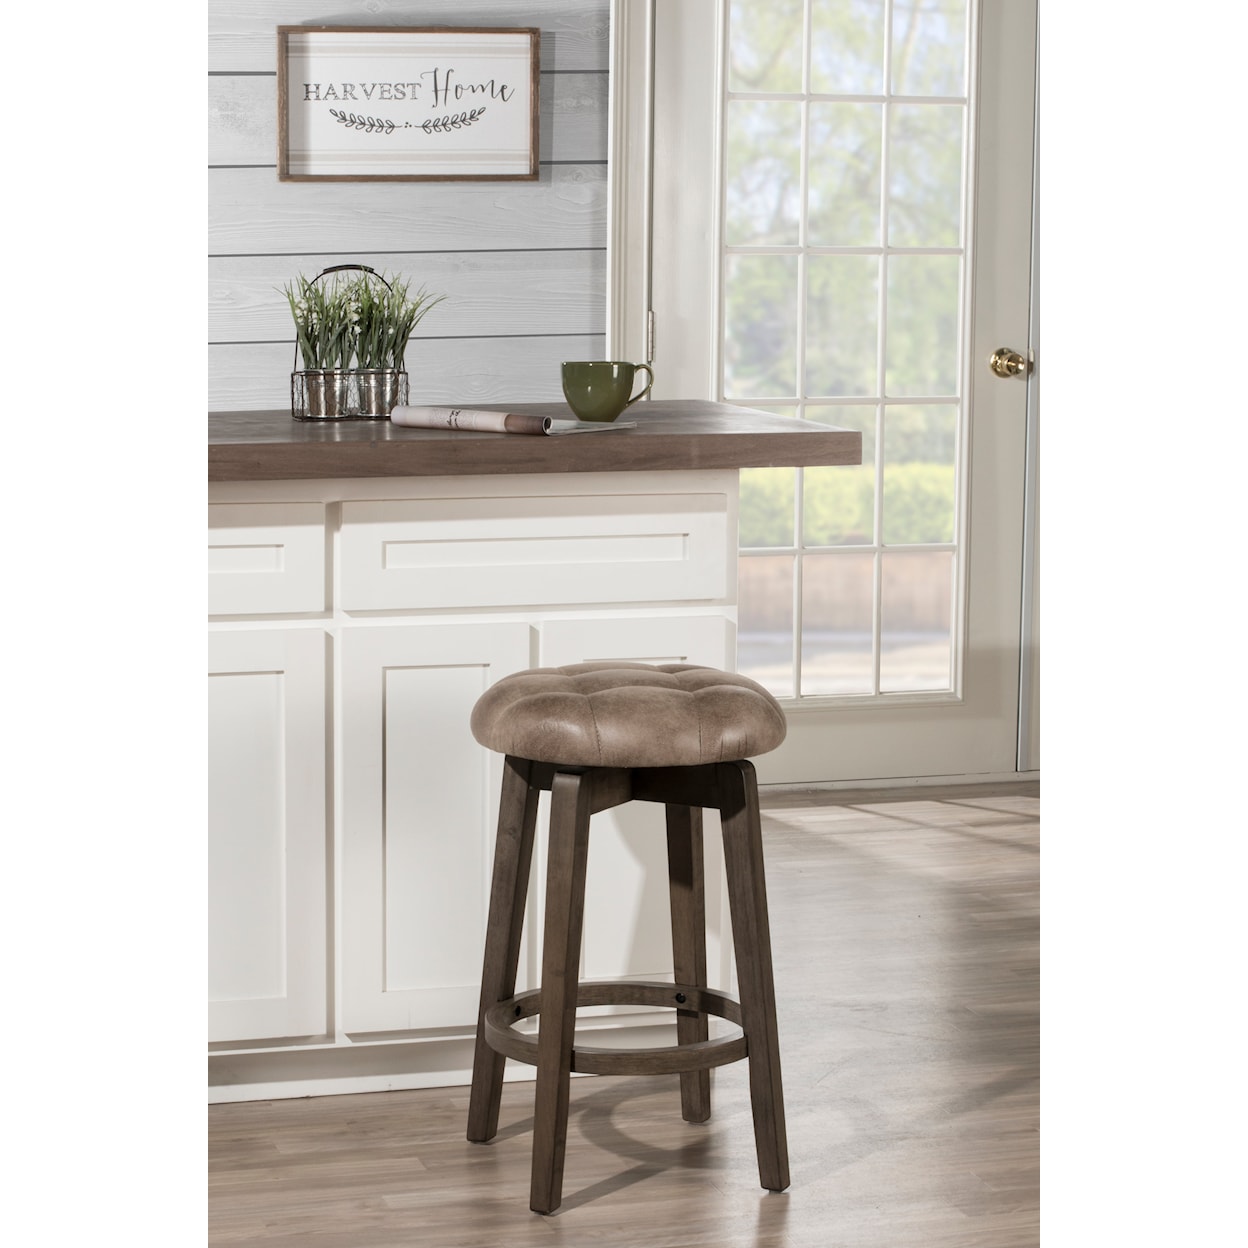 Hillsdale Odette Counter Stool